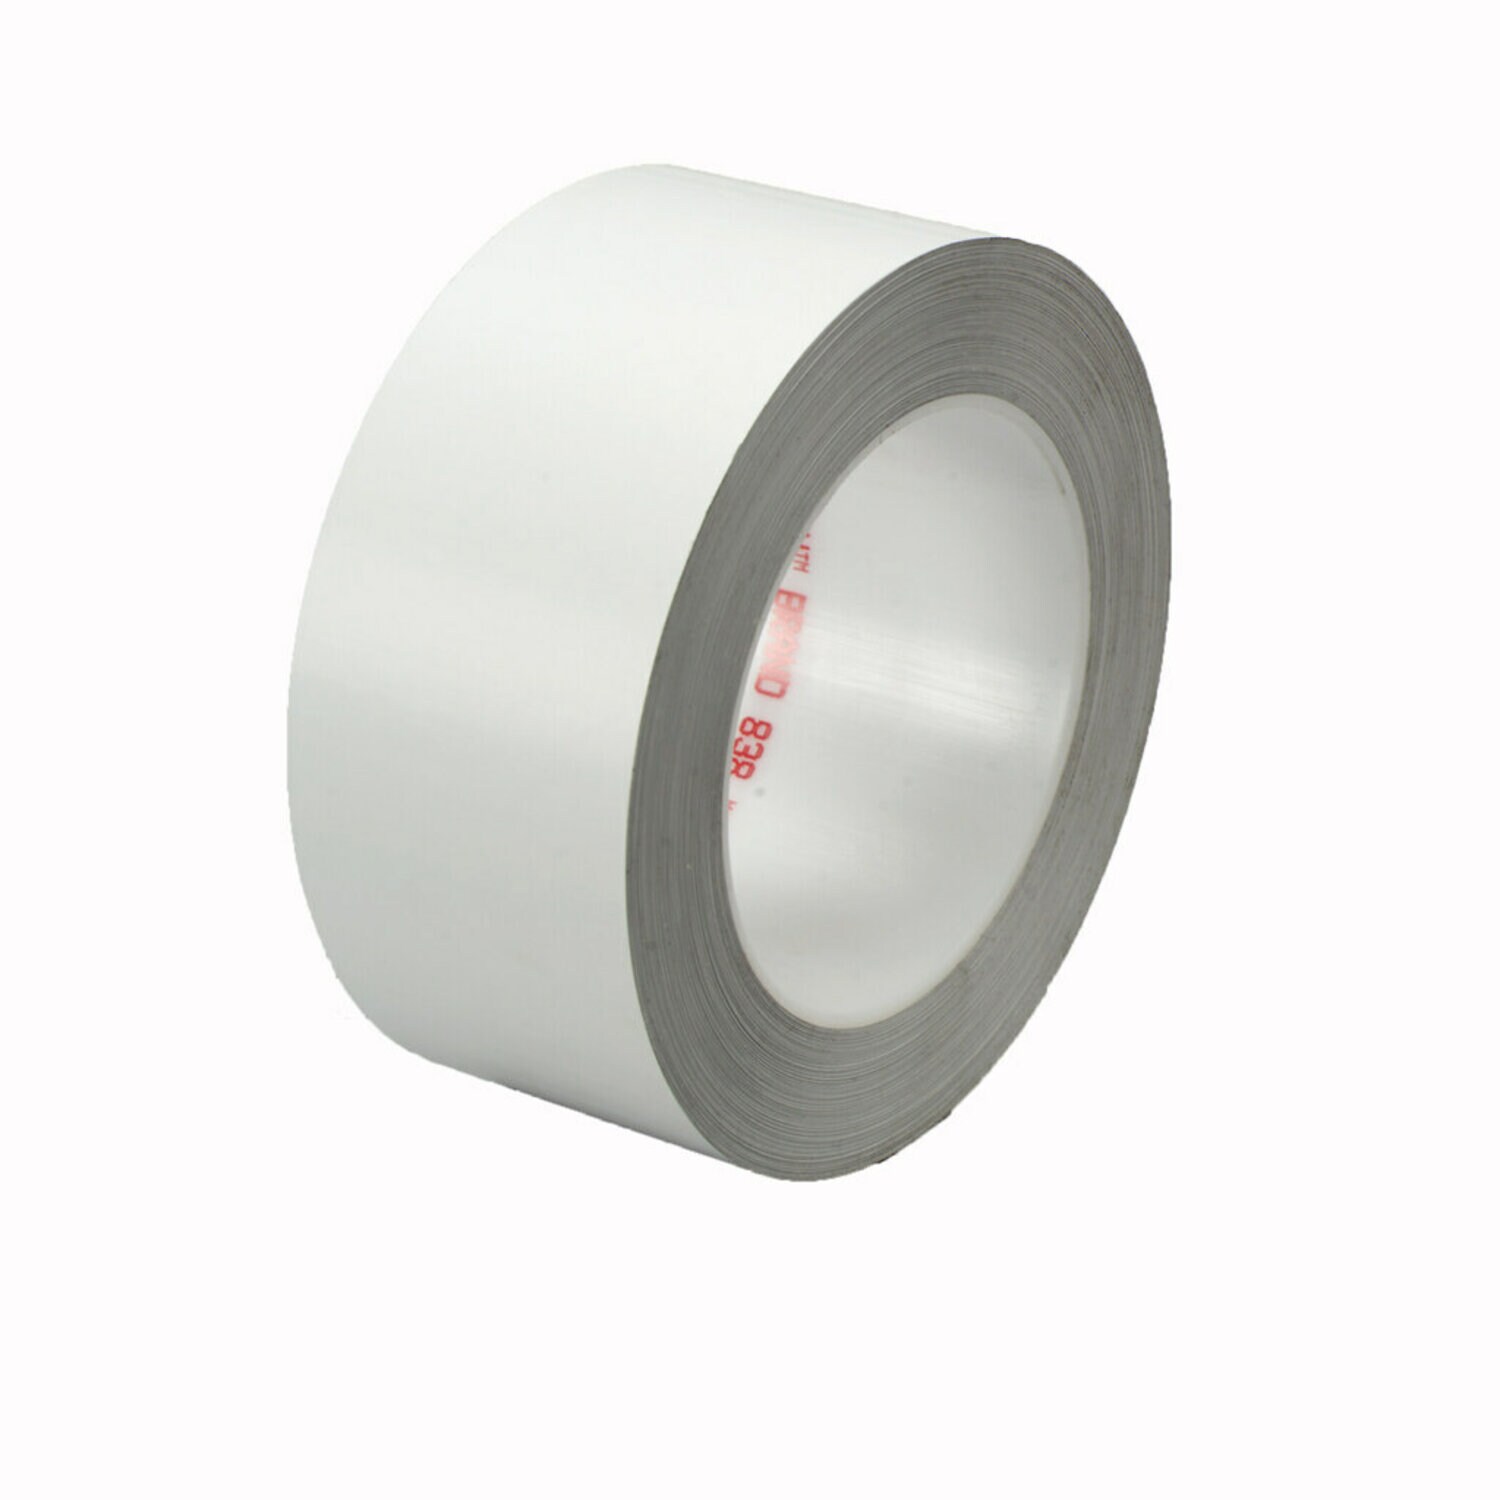 7010048661 - 3M Weather Resistant Film Tape 838, White, 47 in x 72 yd, 3.4 mil, 1
roll per case